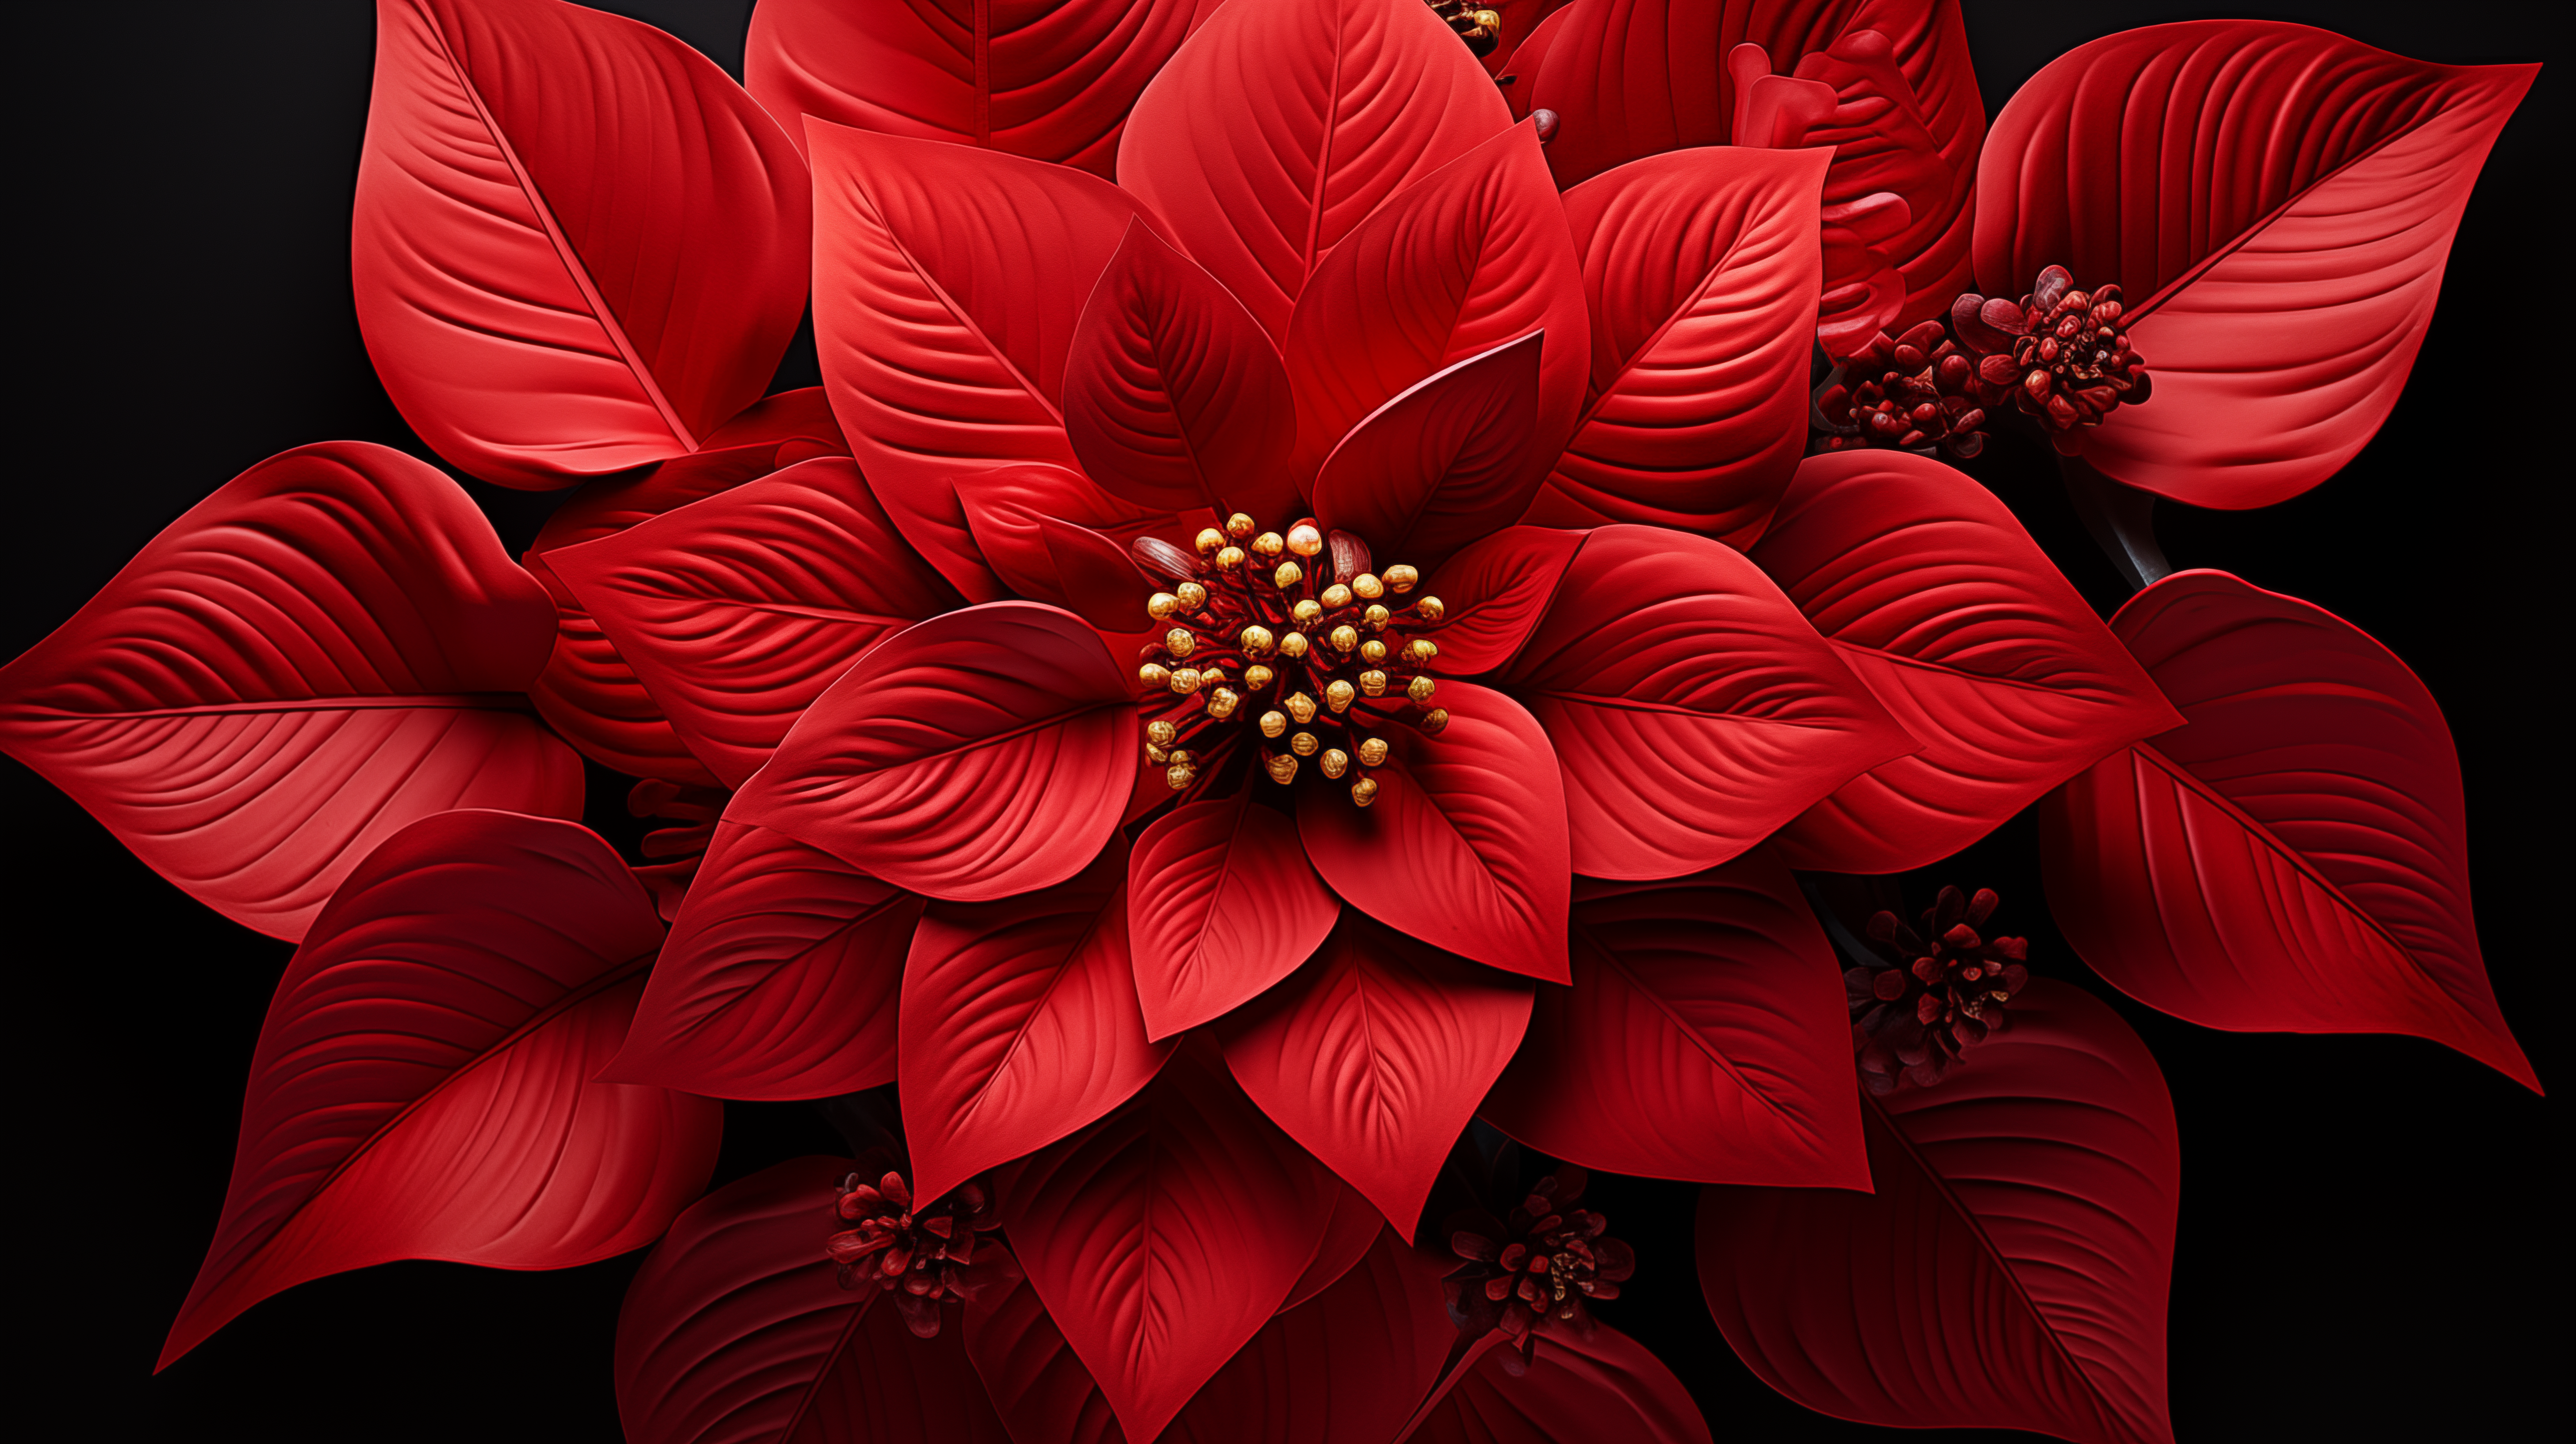 Red poinsettia HD desktop wallpaper and background with vibrant red leaves.